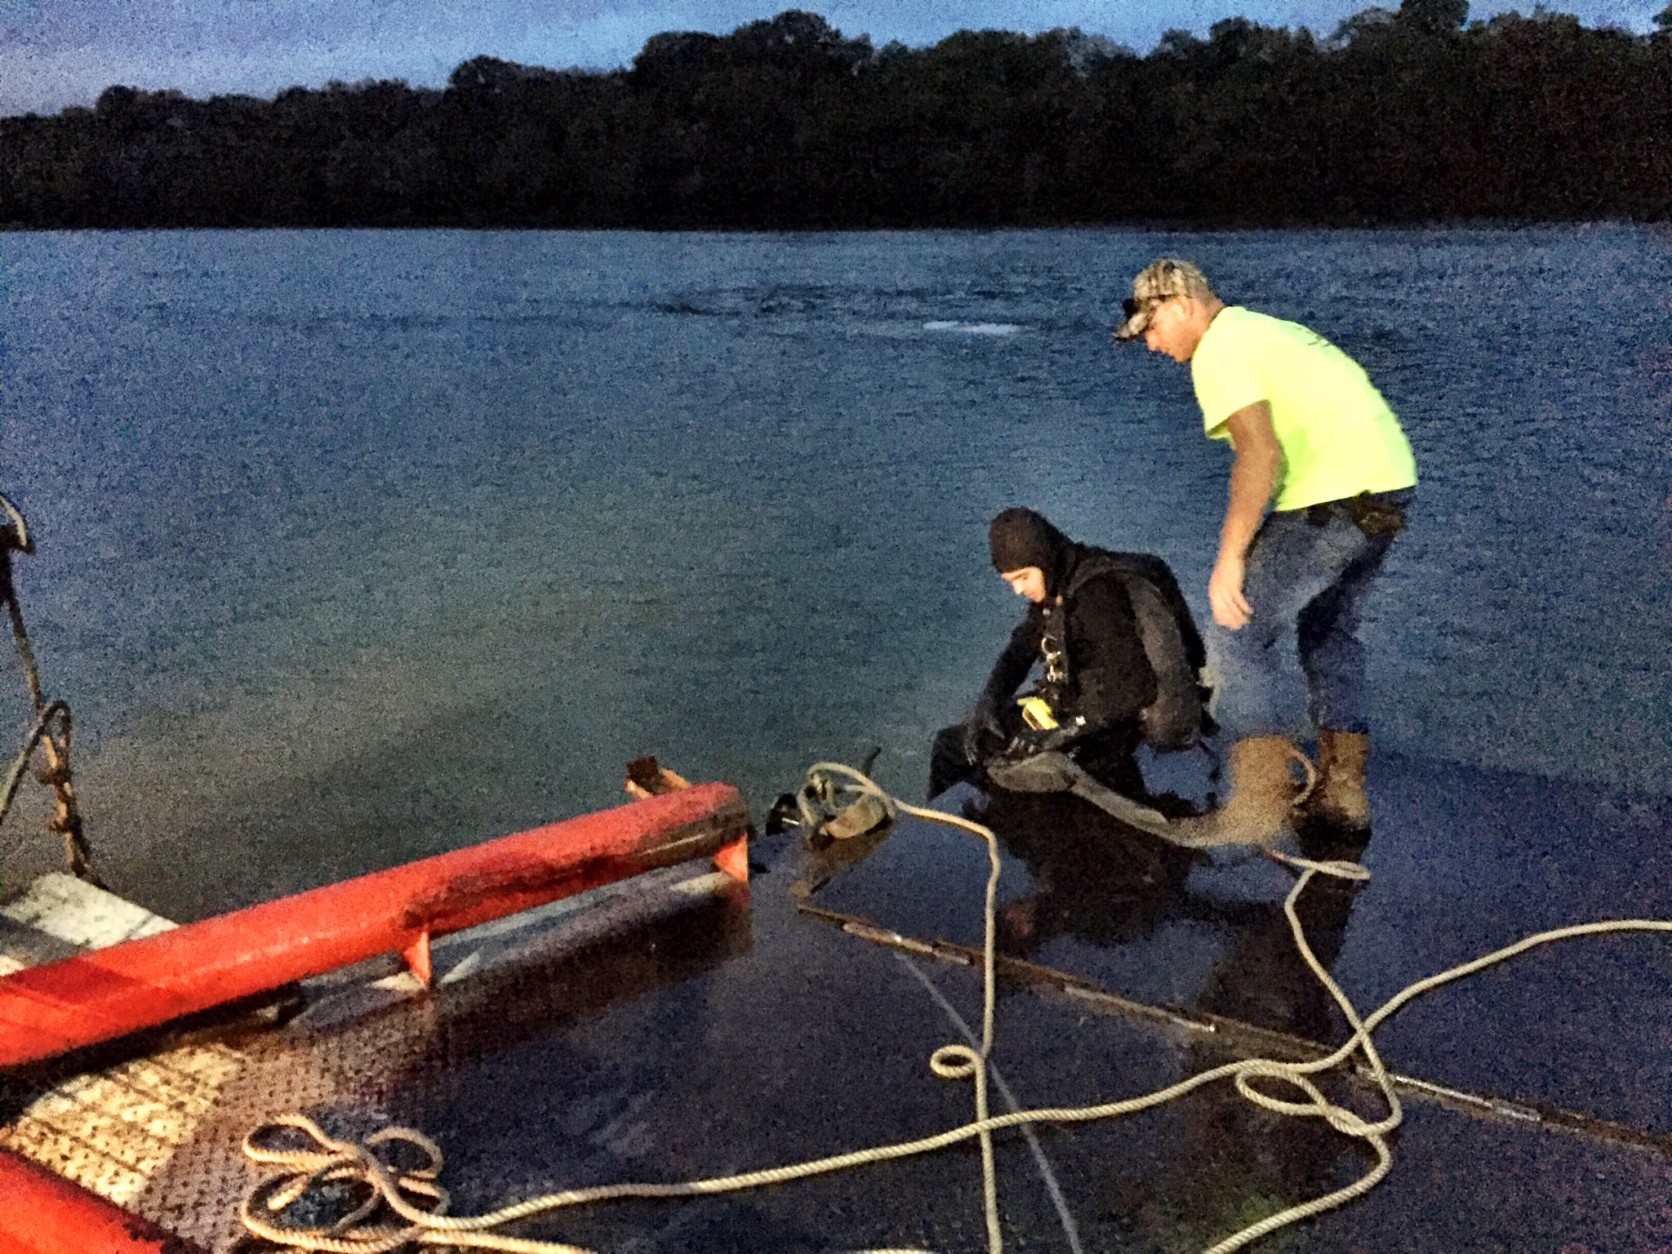 Police divers recover a car out of the water at Whites Ferry. (WTOP/Neal Augenstein)